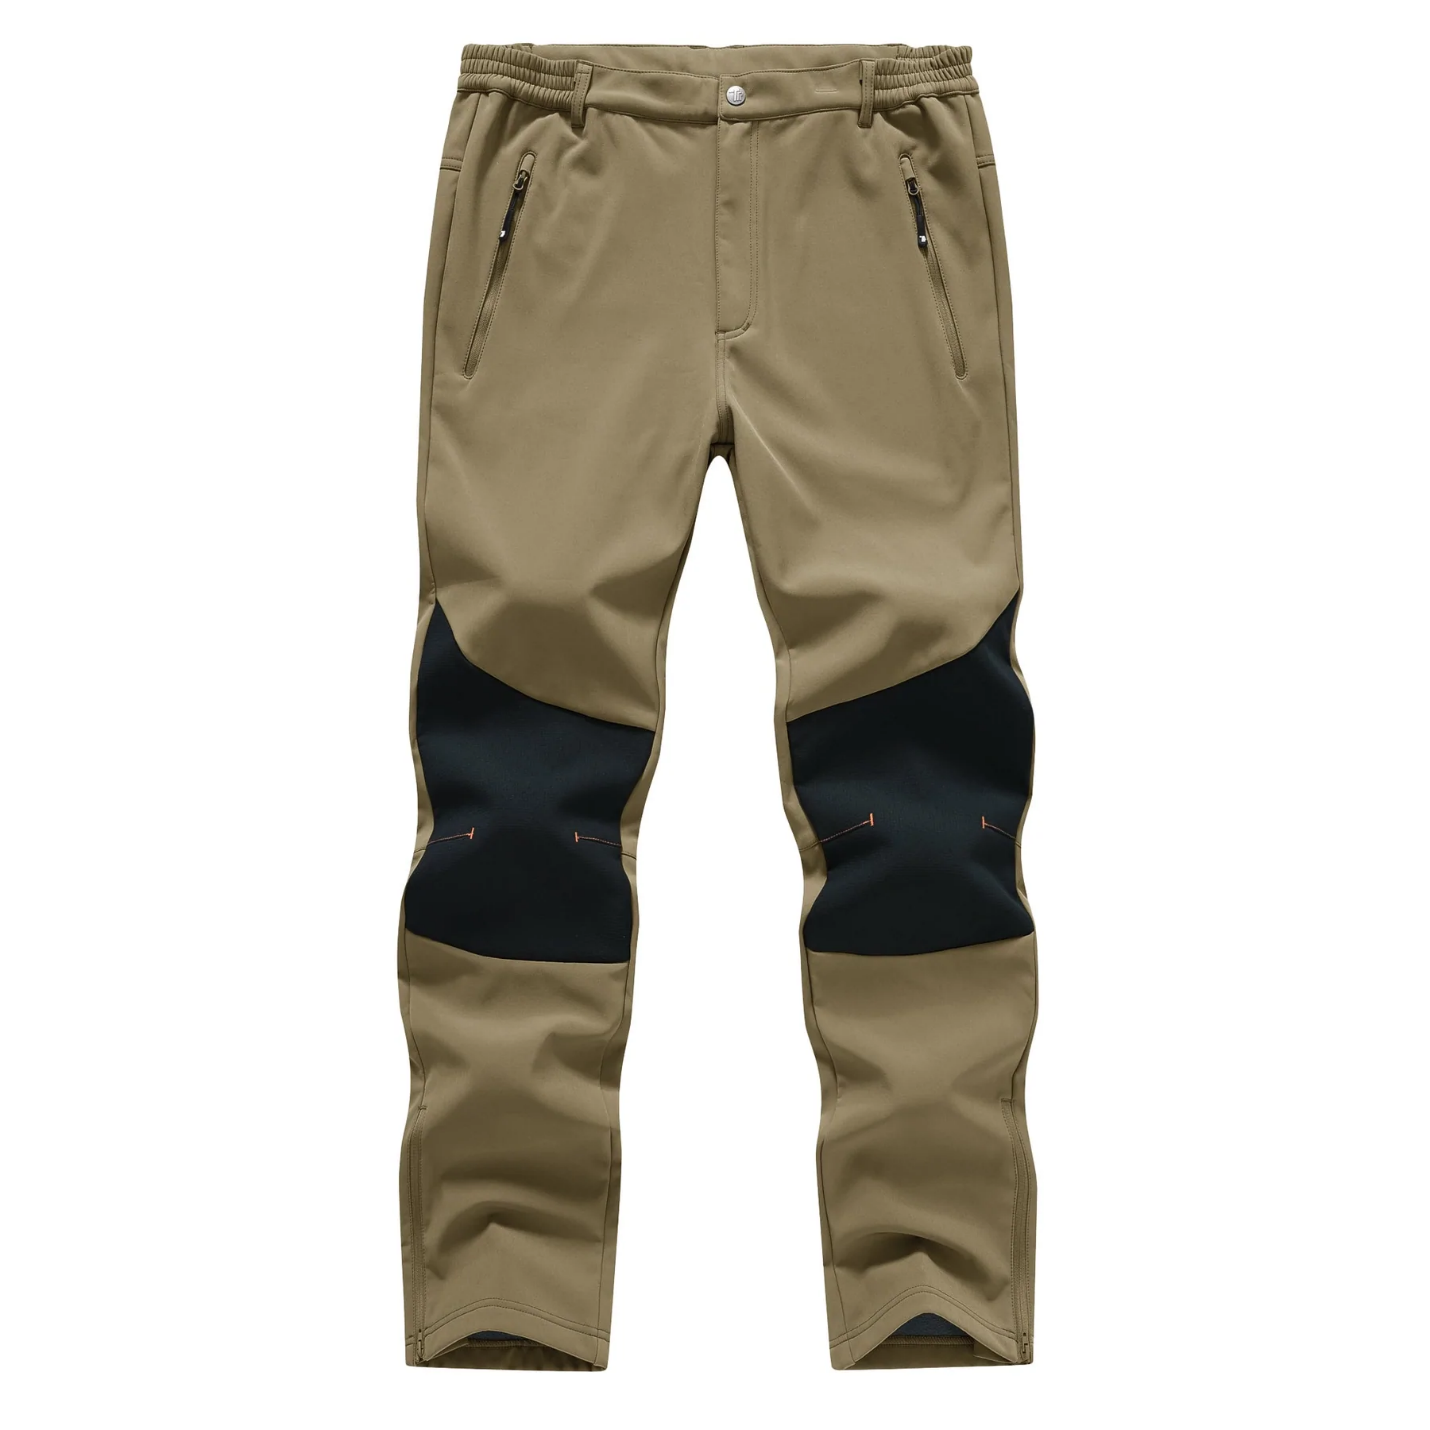 What Are The Best Hiking Pants to Choose From? And Can You Hike While Wearing Tights?